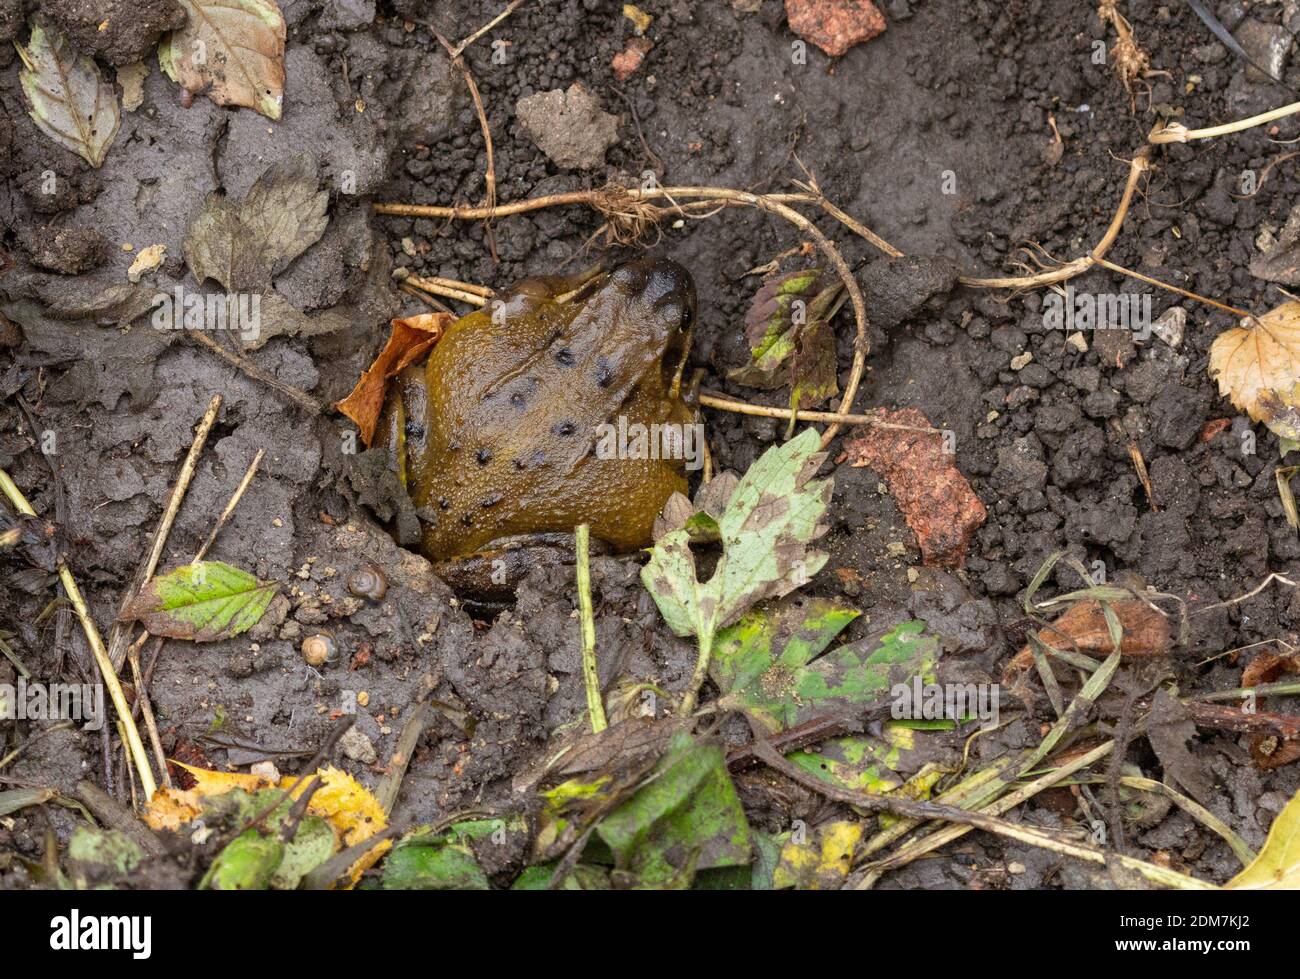 A common toad (UK), bufo bufo, getting ready to hibernate in soil in a Yorkshire garden, England. Stock Photo